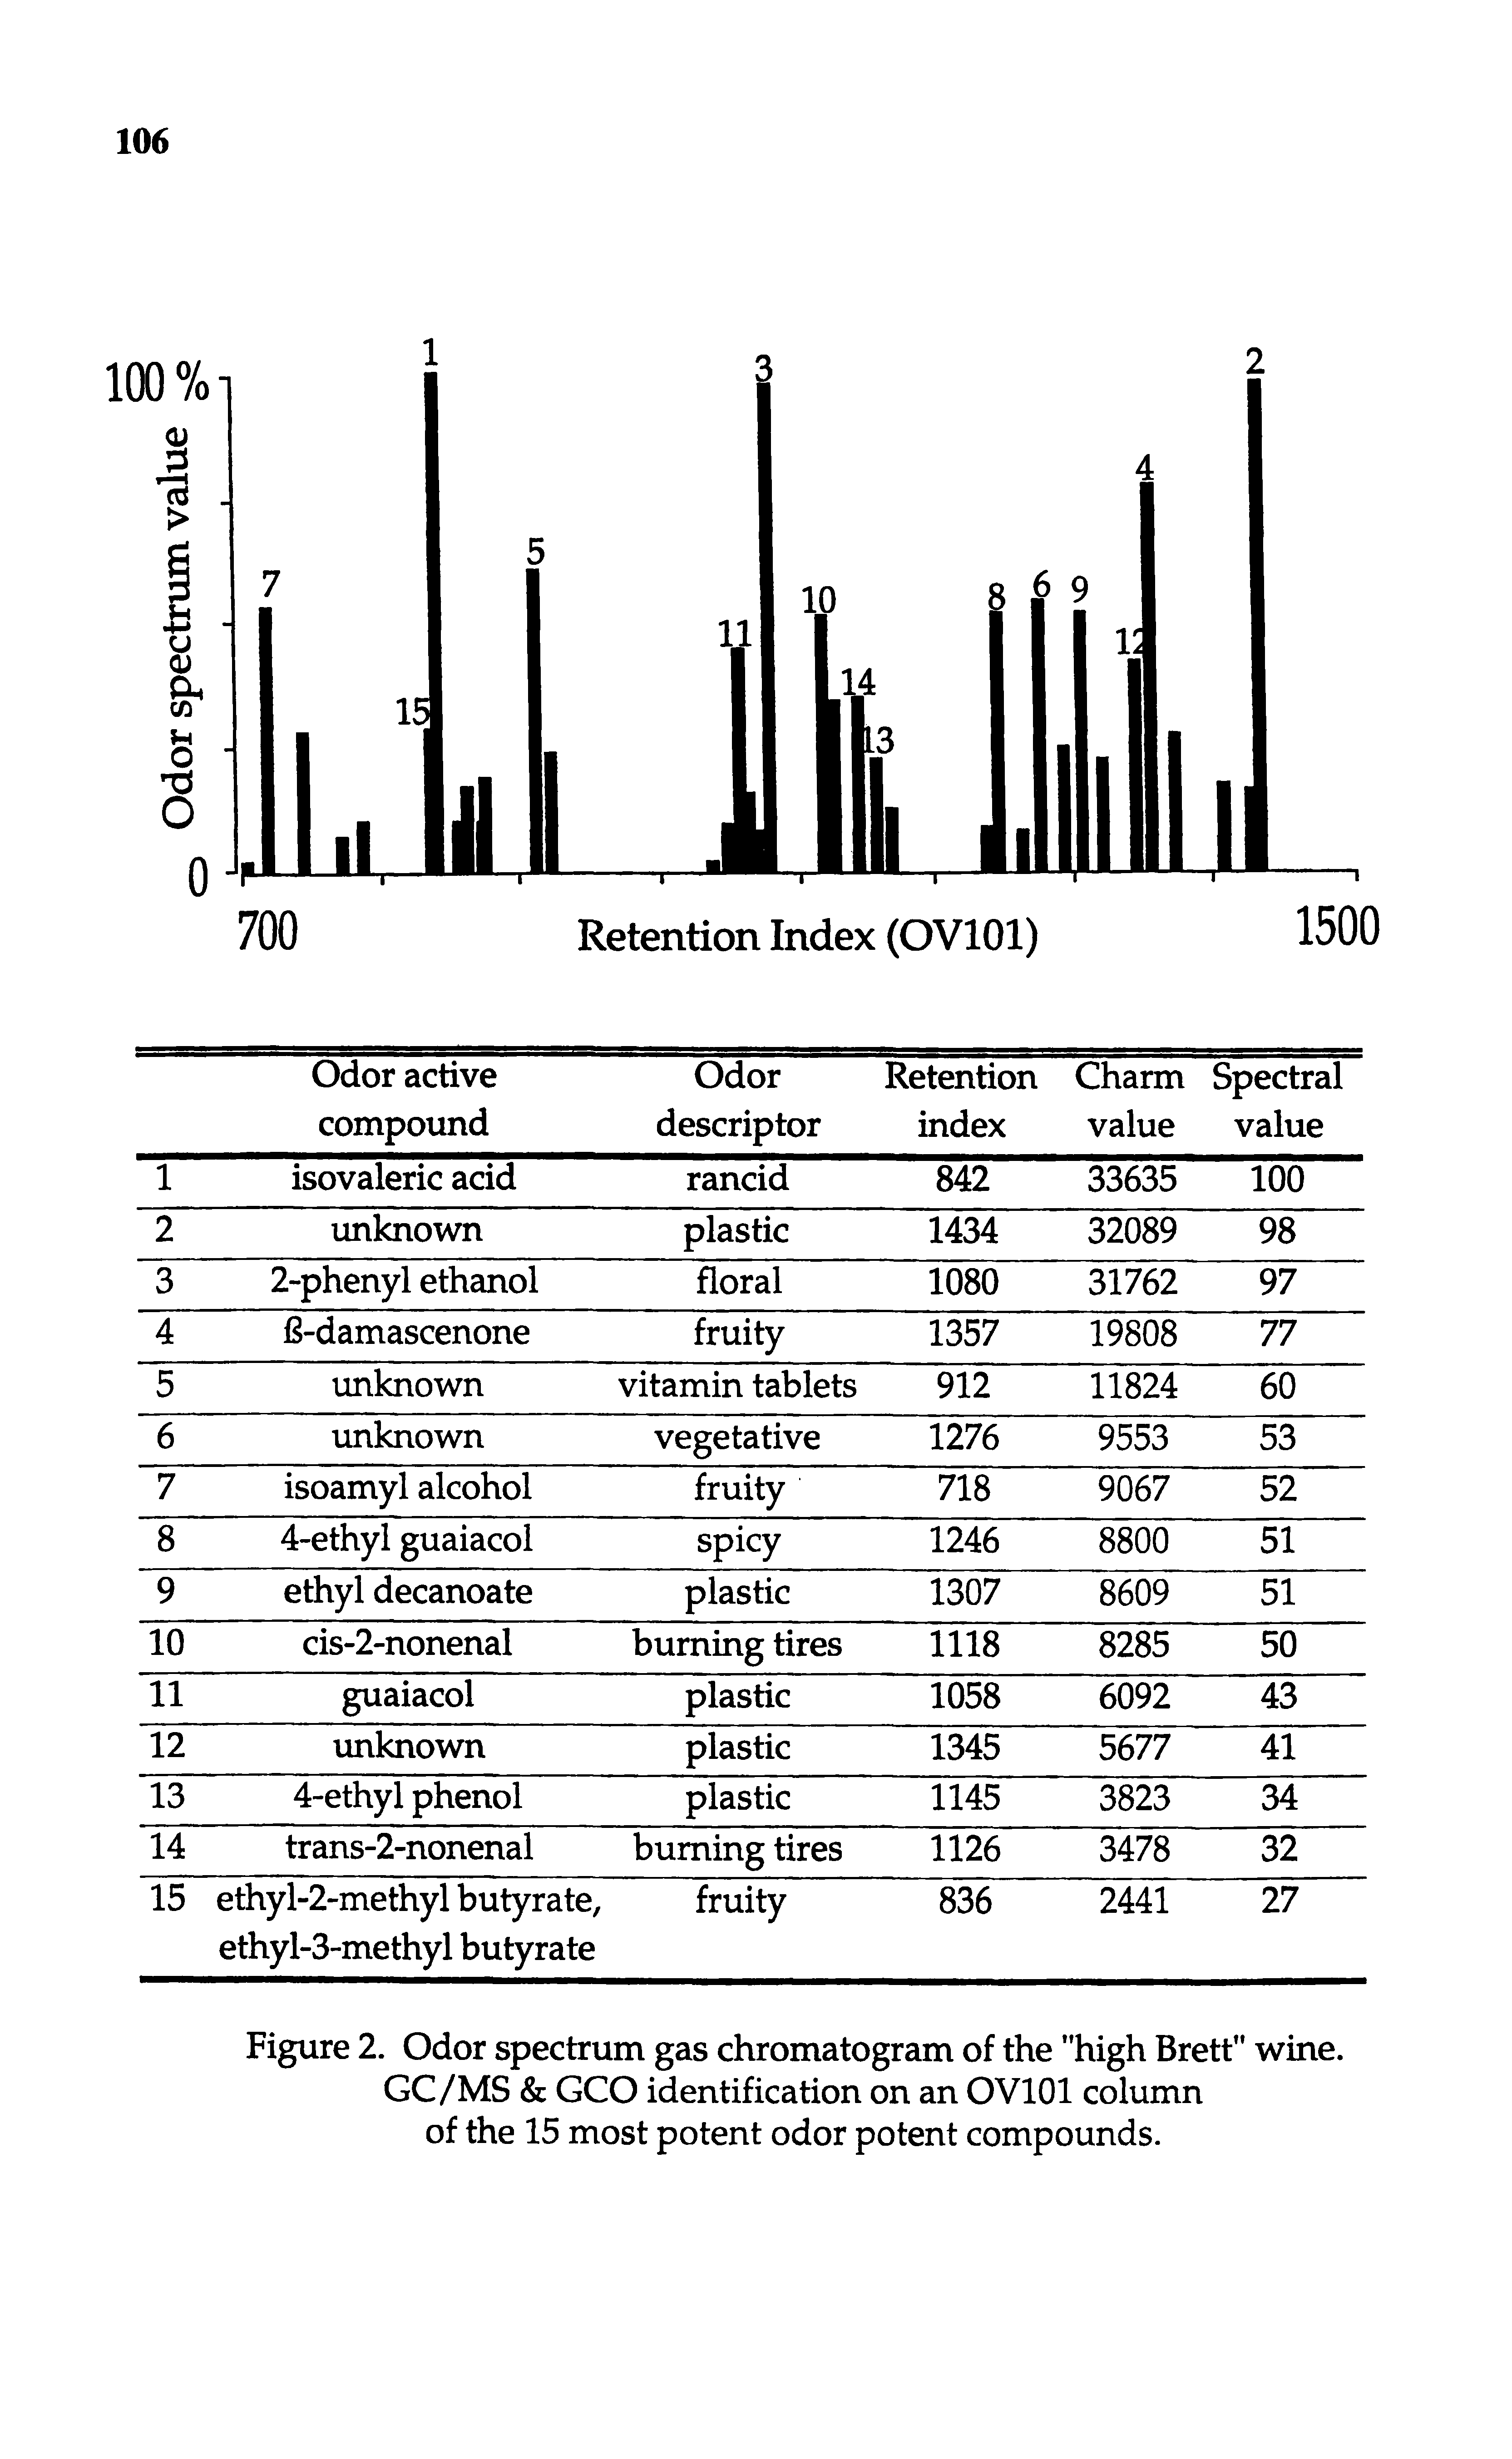 Figure 2. Odor spectrum gas chromatogram of the "high Brett" wine. GC/MS GCO identification on an OVlOl column of the 15 most potent odor potent compounds.